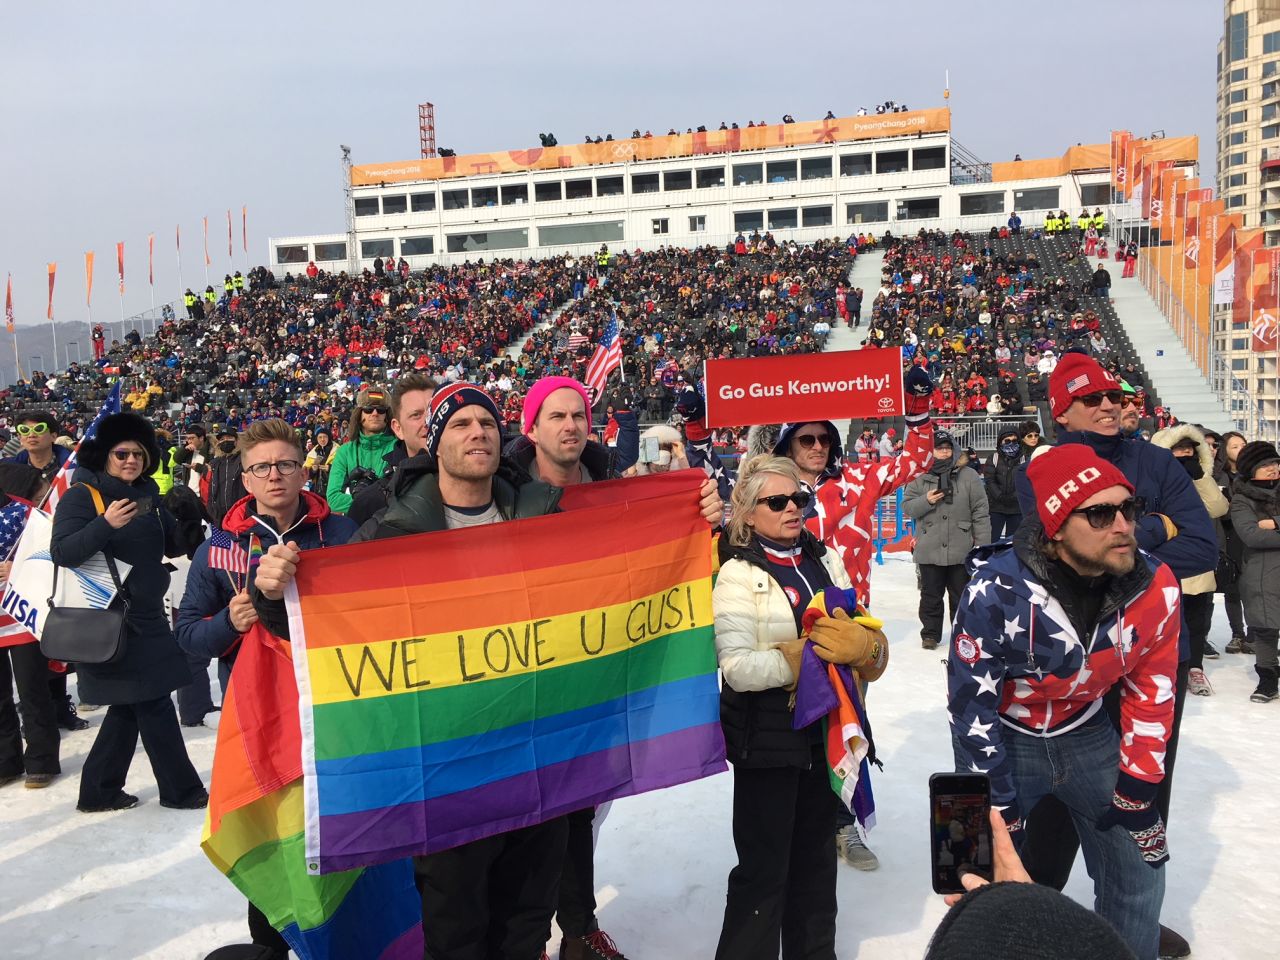 America's Gus Kenworthy made the headlines not for his snowboarding prowess, but for kissing his boyfriend, Mathew Wakes, live on TV. The moment was hailed as a celebration of LGBTQ pride.